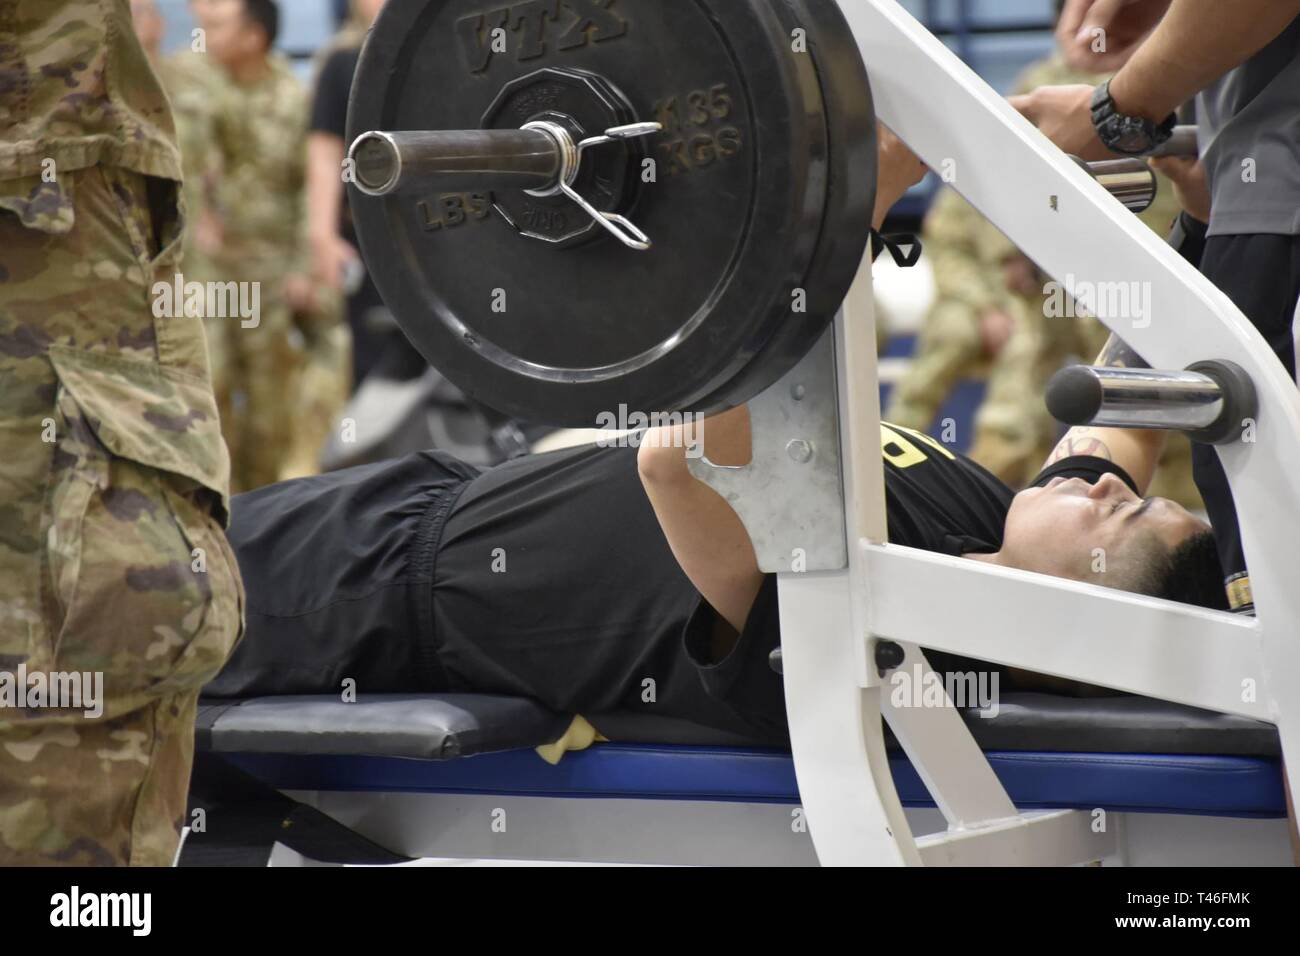 Sgt. Christopher Campos competes in the powerlifting competition at Fort Bliss, Texas, Mar. 8, during the 2019 Army Trials. The 2019 Army Trials at Fort Bliss, Texas is an adaptive sports competition from Mar. 5-16 with over 100 wounded, ill and injured active-duty Soldiers and veterans competing in 14 different sports for the opportunity to represent Team Army at the 2019 Department of Defense Warrior Games in Tampa, Florida. Stock Photo